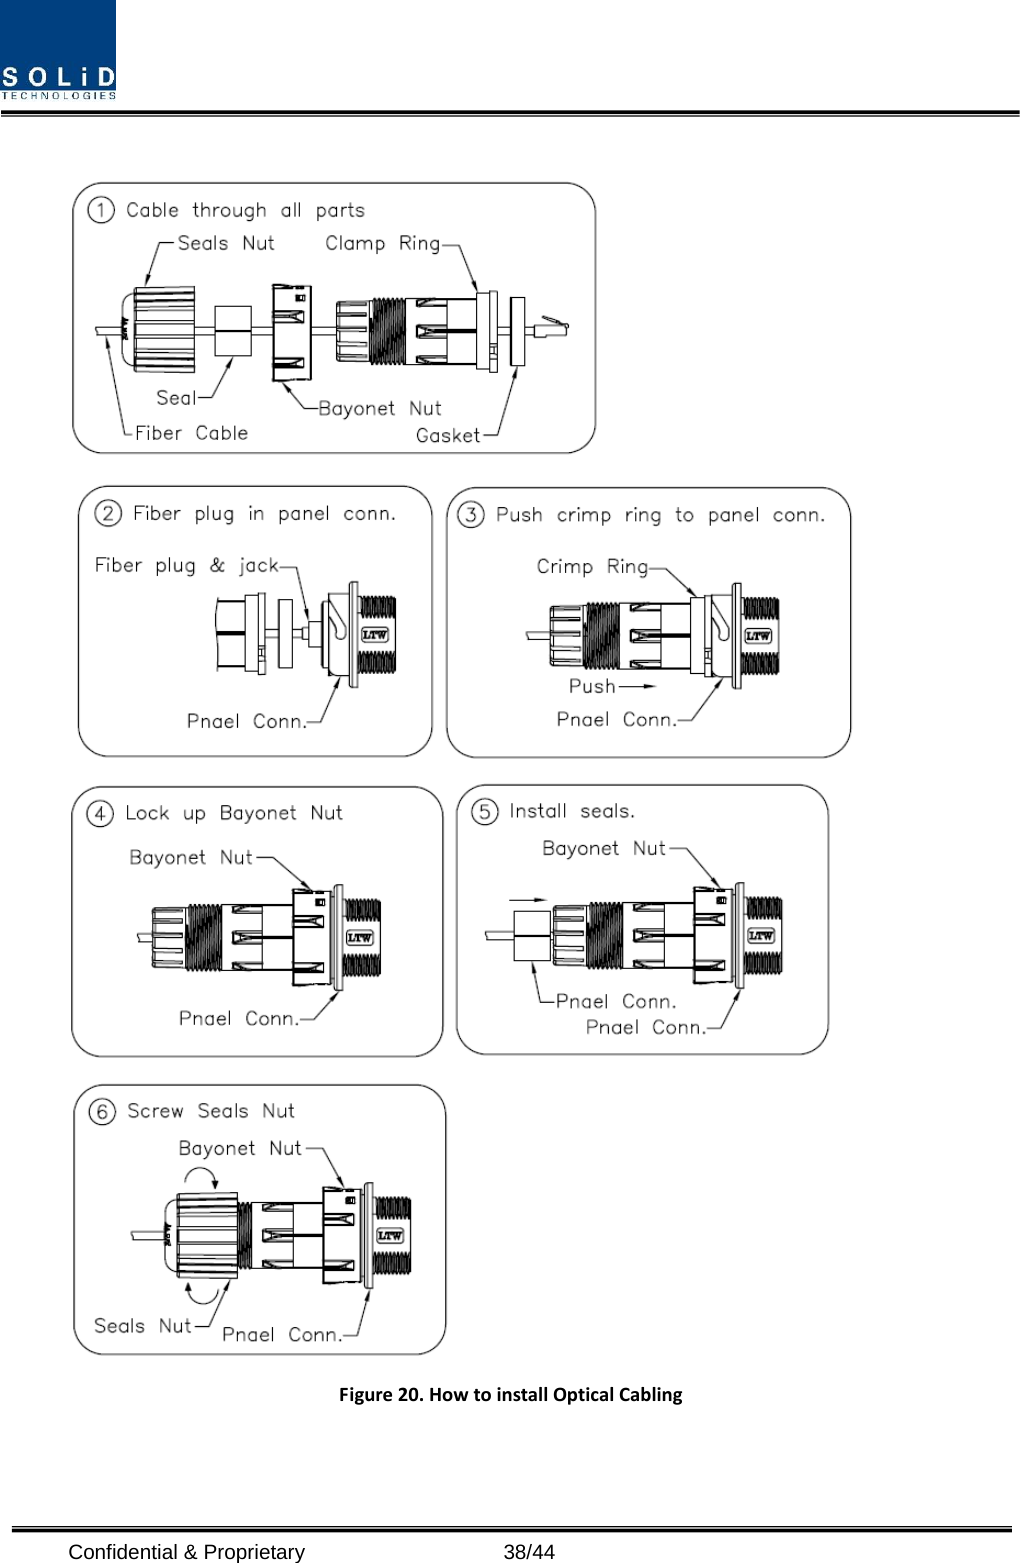    Figure 20. How to install Optical Cabling  Confidential &amp; Proprietary                   38/44 